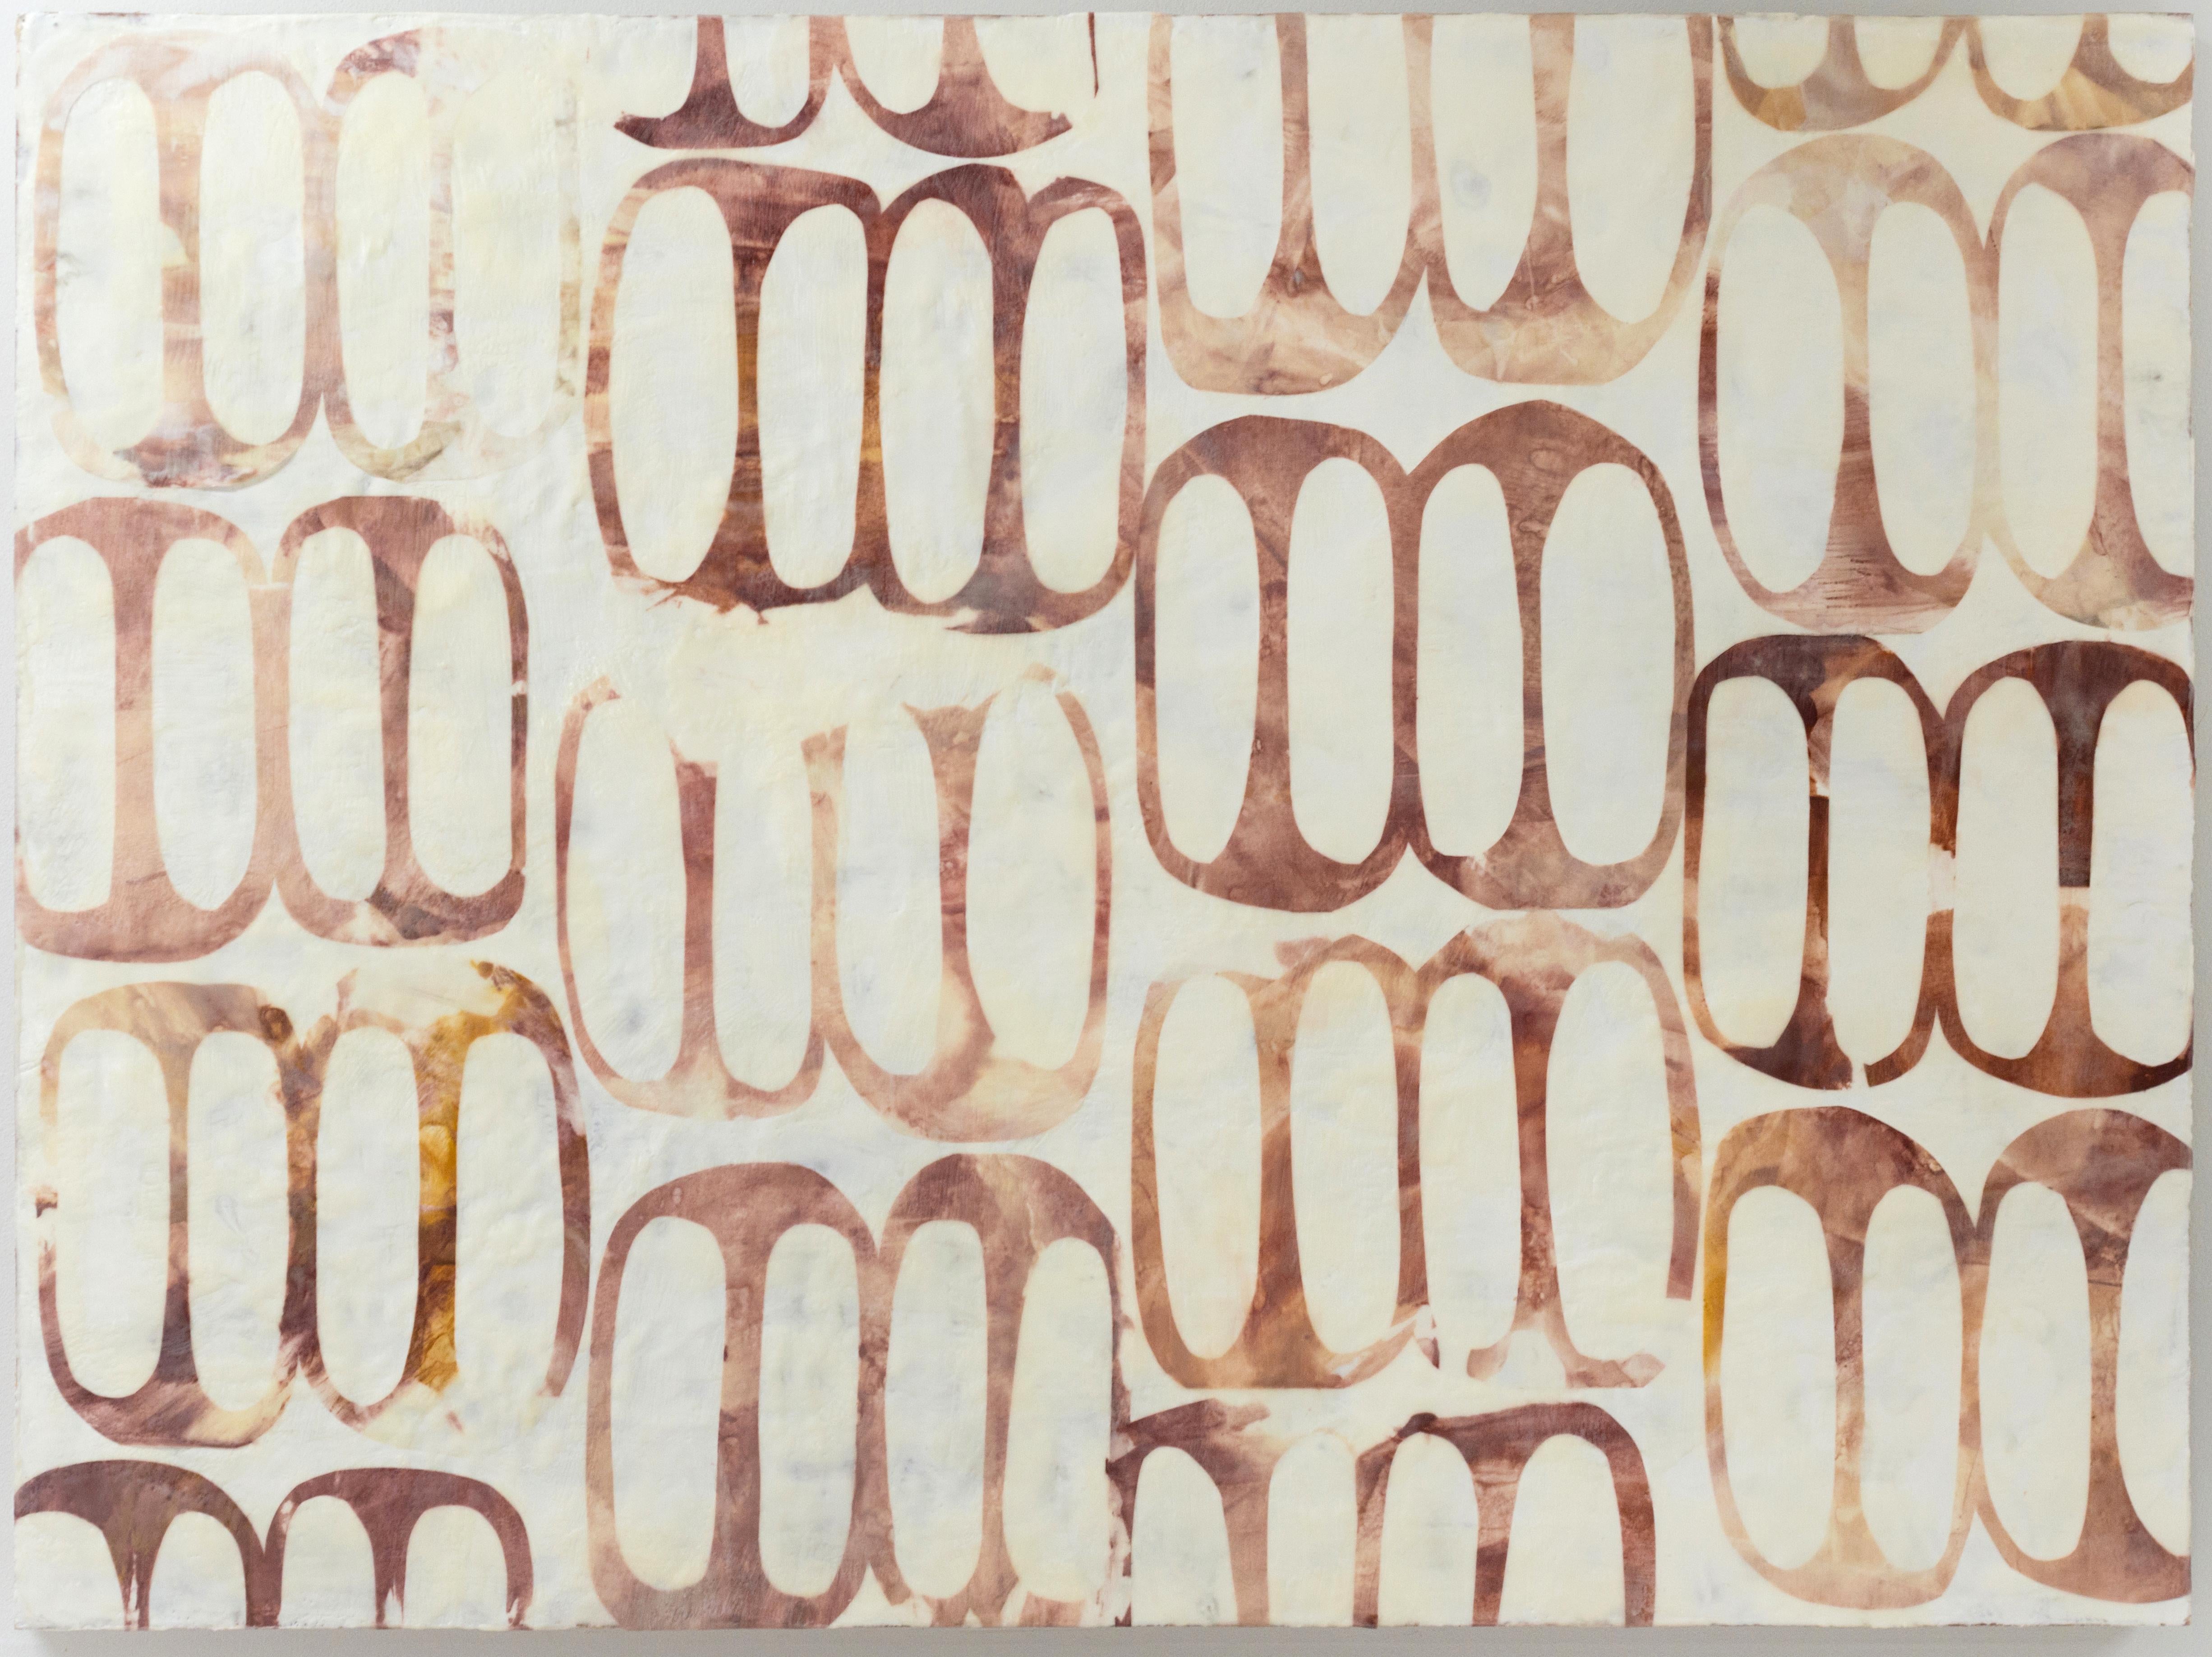 Centuries (Abstract Geometric Encaustic Painting In Patterned Ochre and White)